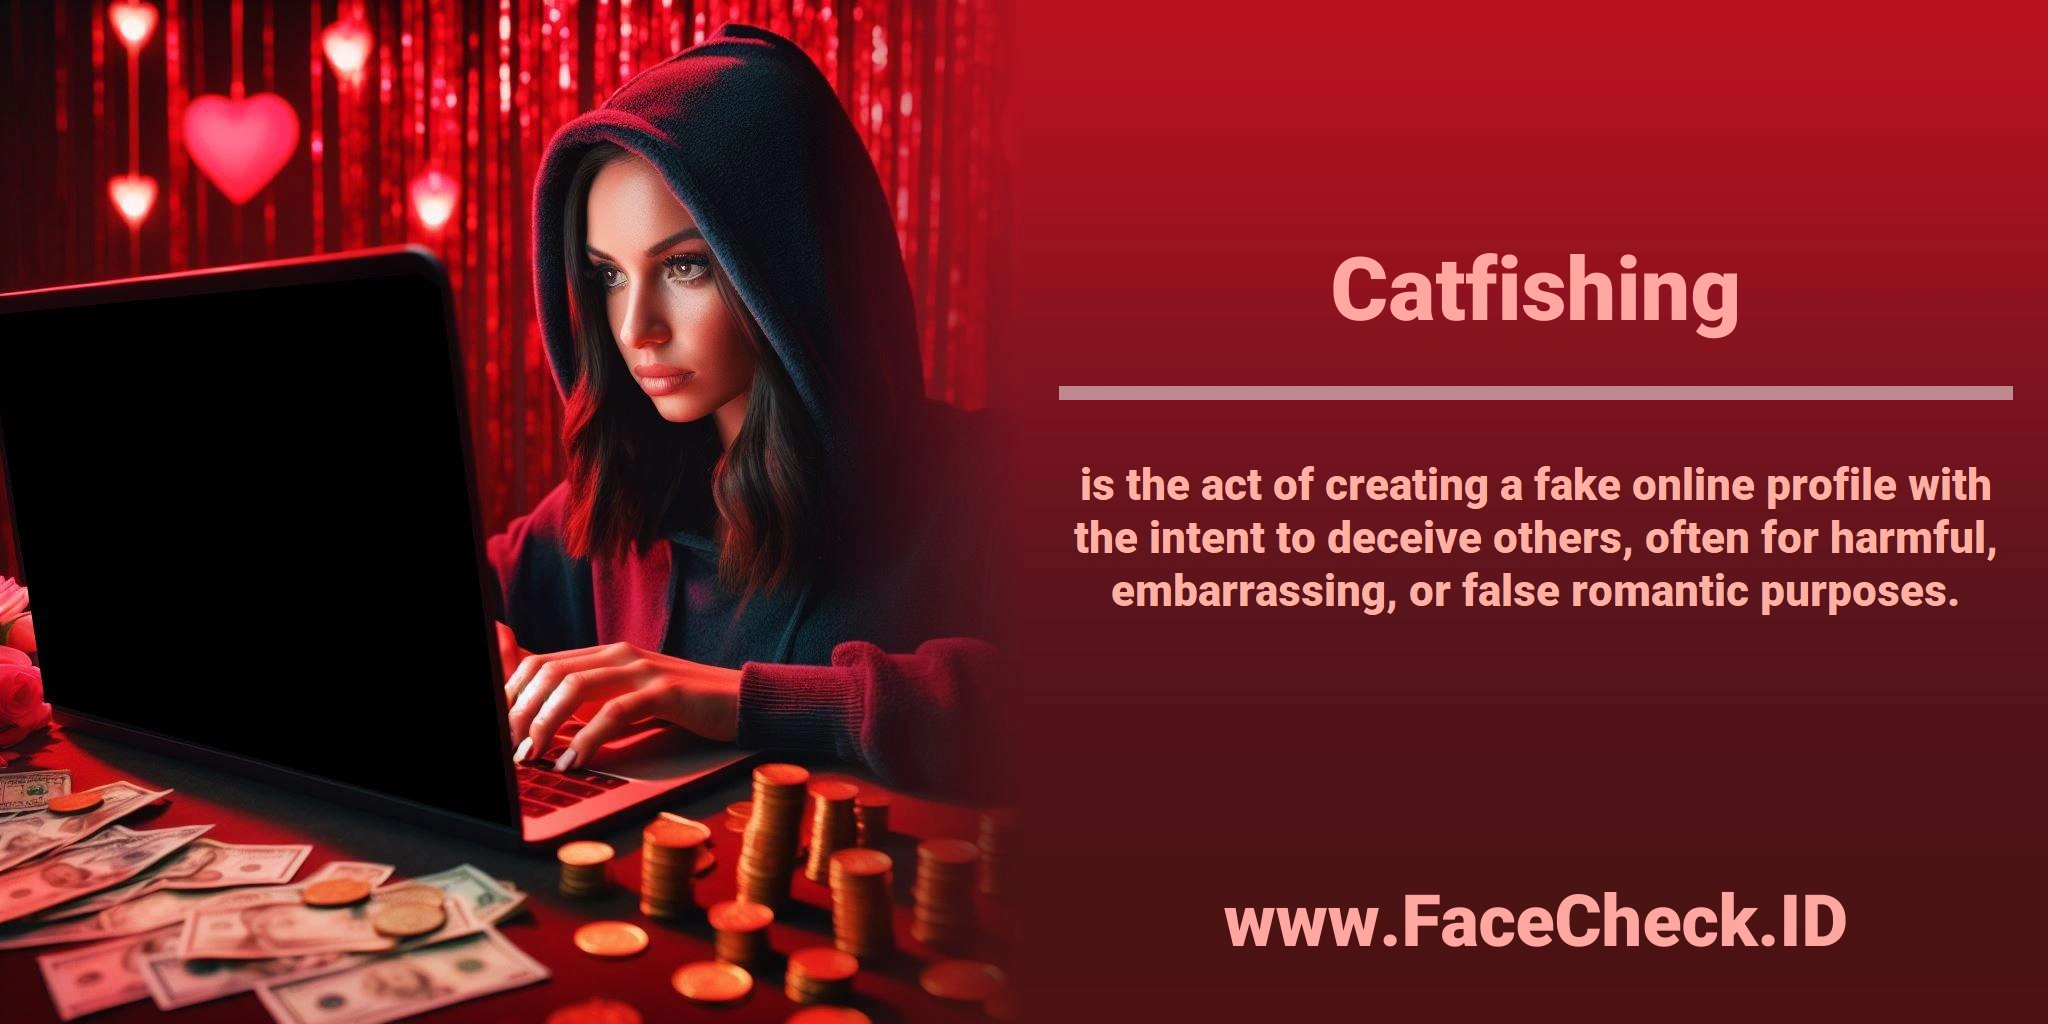 <b>Catfishing</b> is the act of creating a fake online profile with the intent to deceive others, often for harmful, embarrassing, or false romantic purposes.